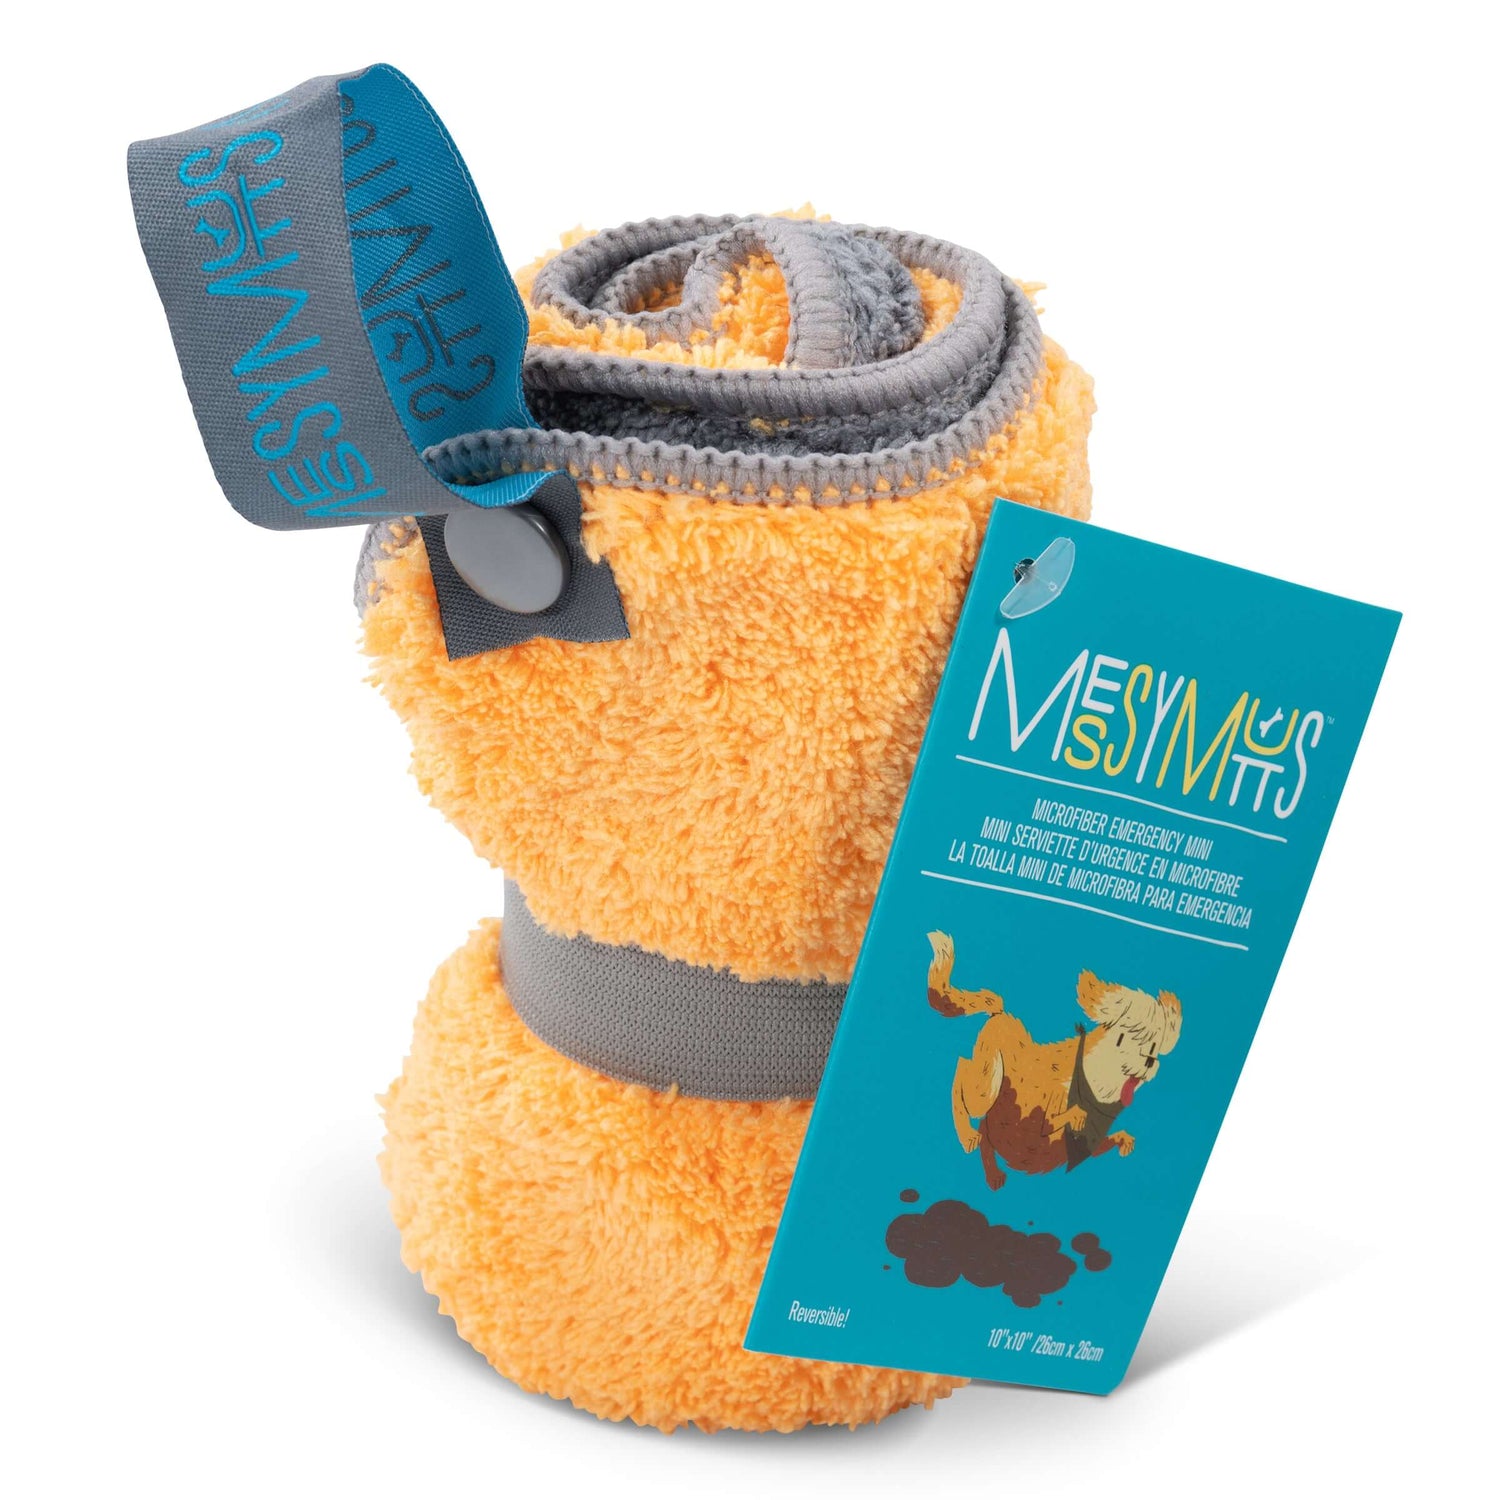 Microfiber mini dog towel that rolls up for storage and clips on to your leash or pack for easy access.